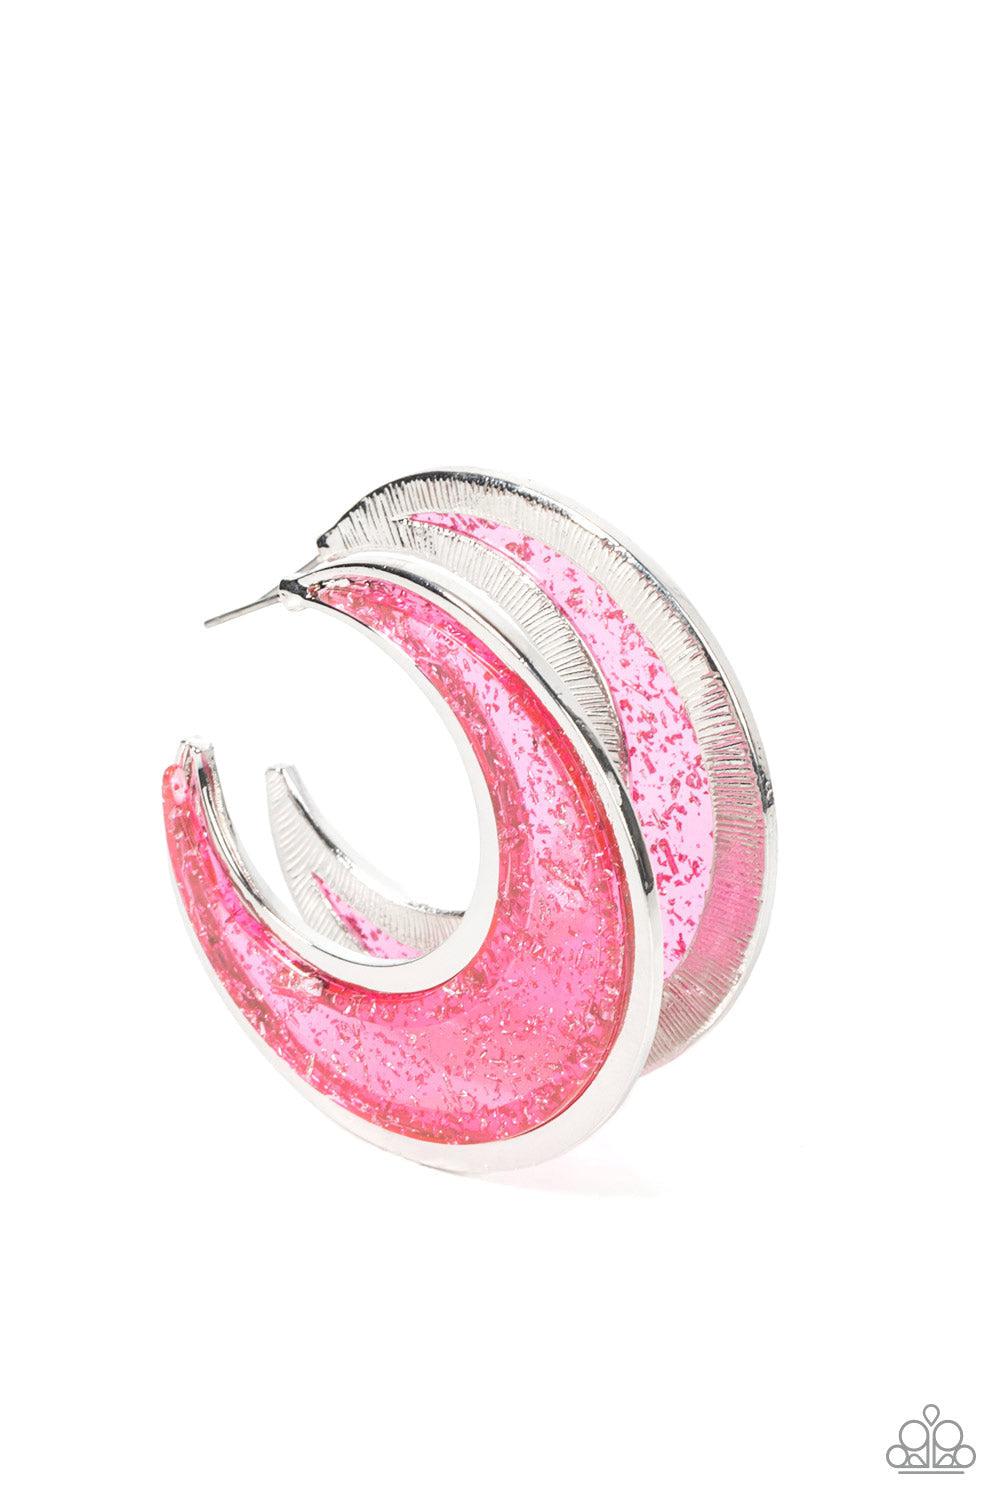 Charismatically Curvy Pink Acrylic Hoop Earrings - Paparazzi Accessories- lightbox - CarasShop.com - $5 Jewelry by Cara Jewels